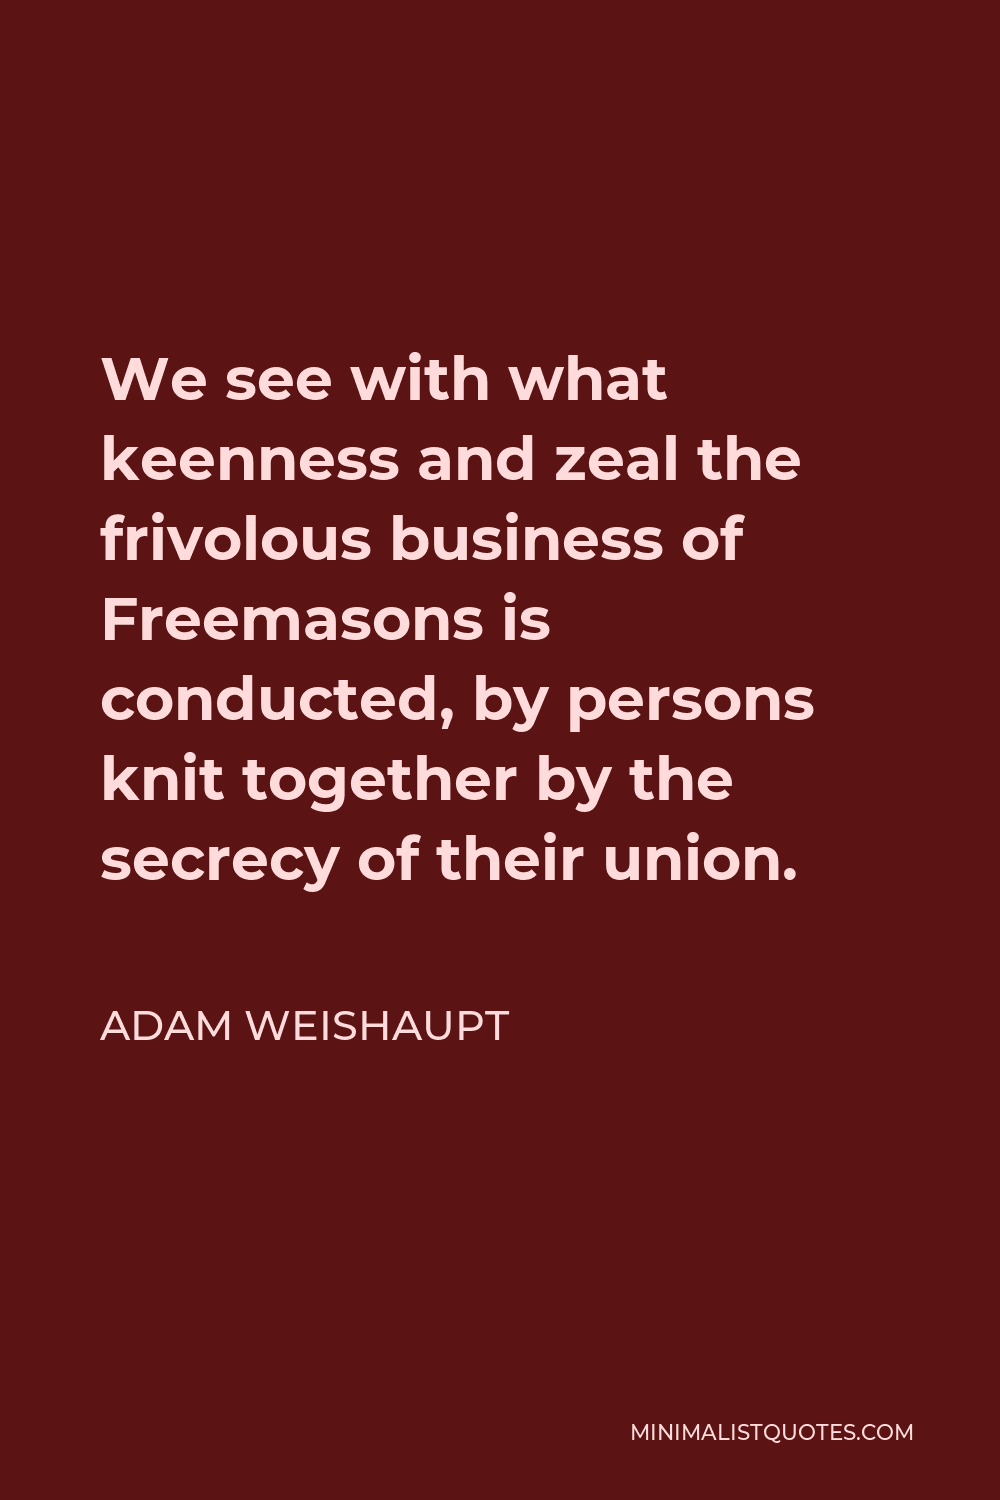 Adam Weishaupt Quote - We see with what keenness and zeal the frivolous business of Freemasons is conducted, by persons knit together by the secrecy of their union.